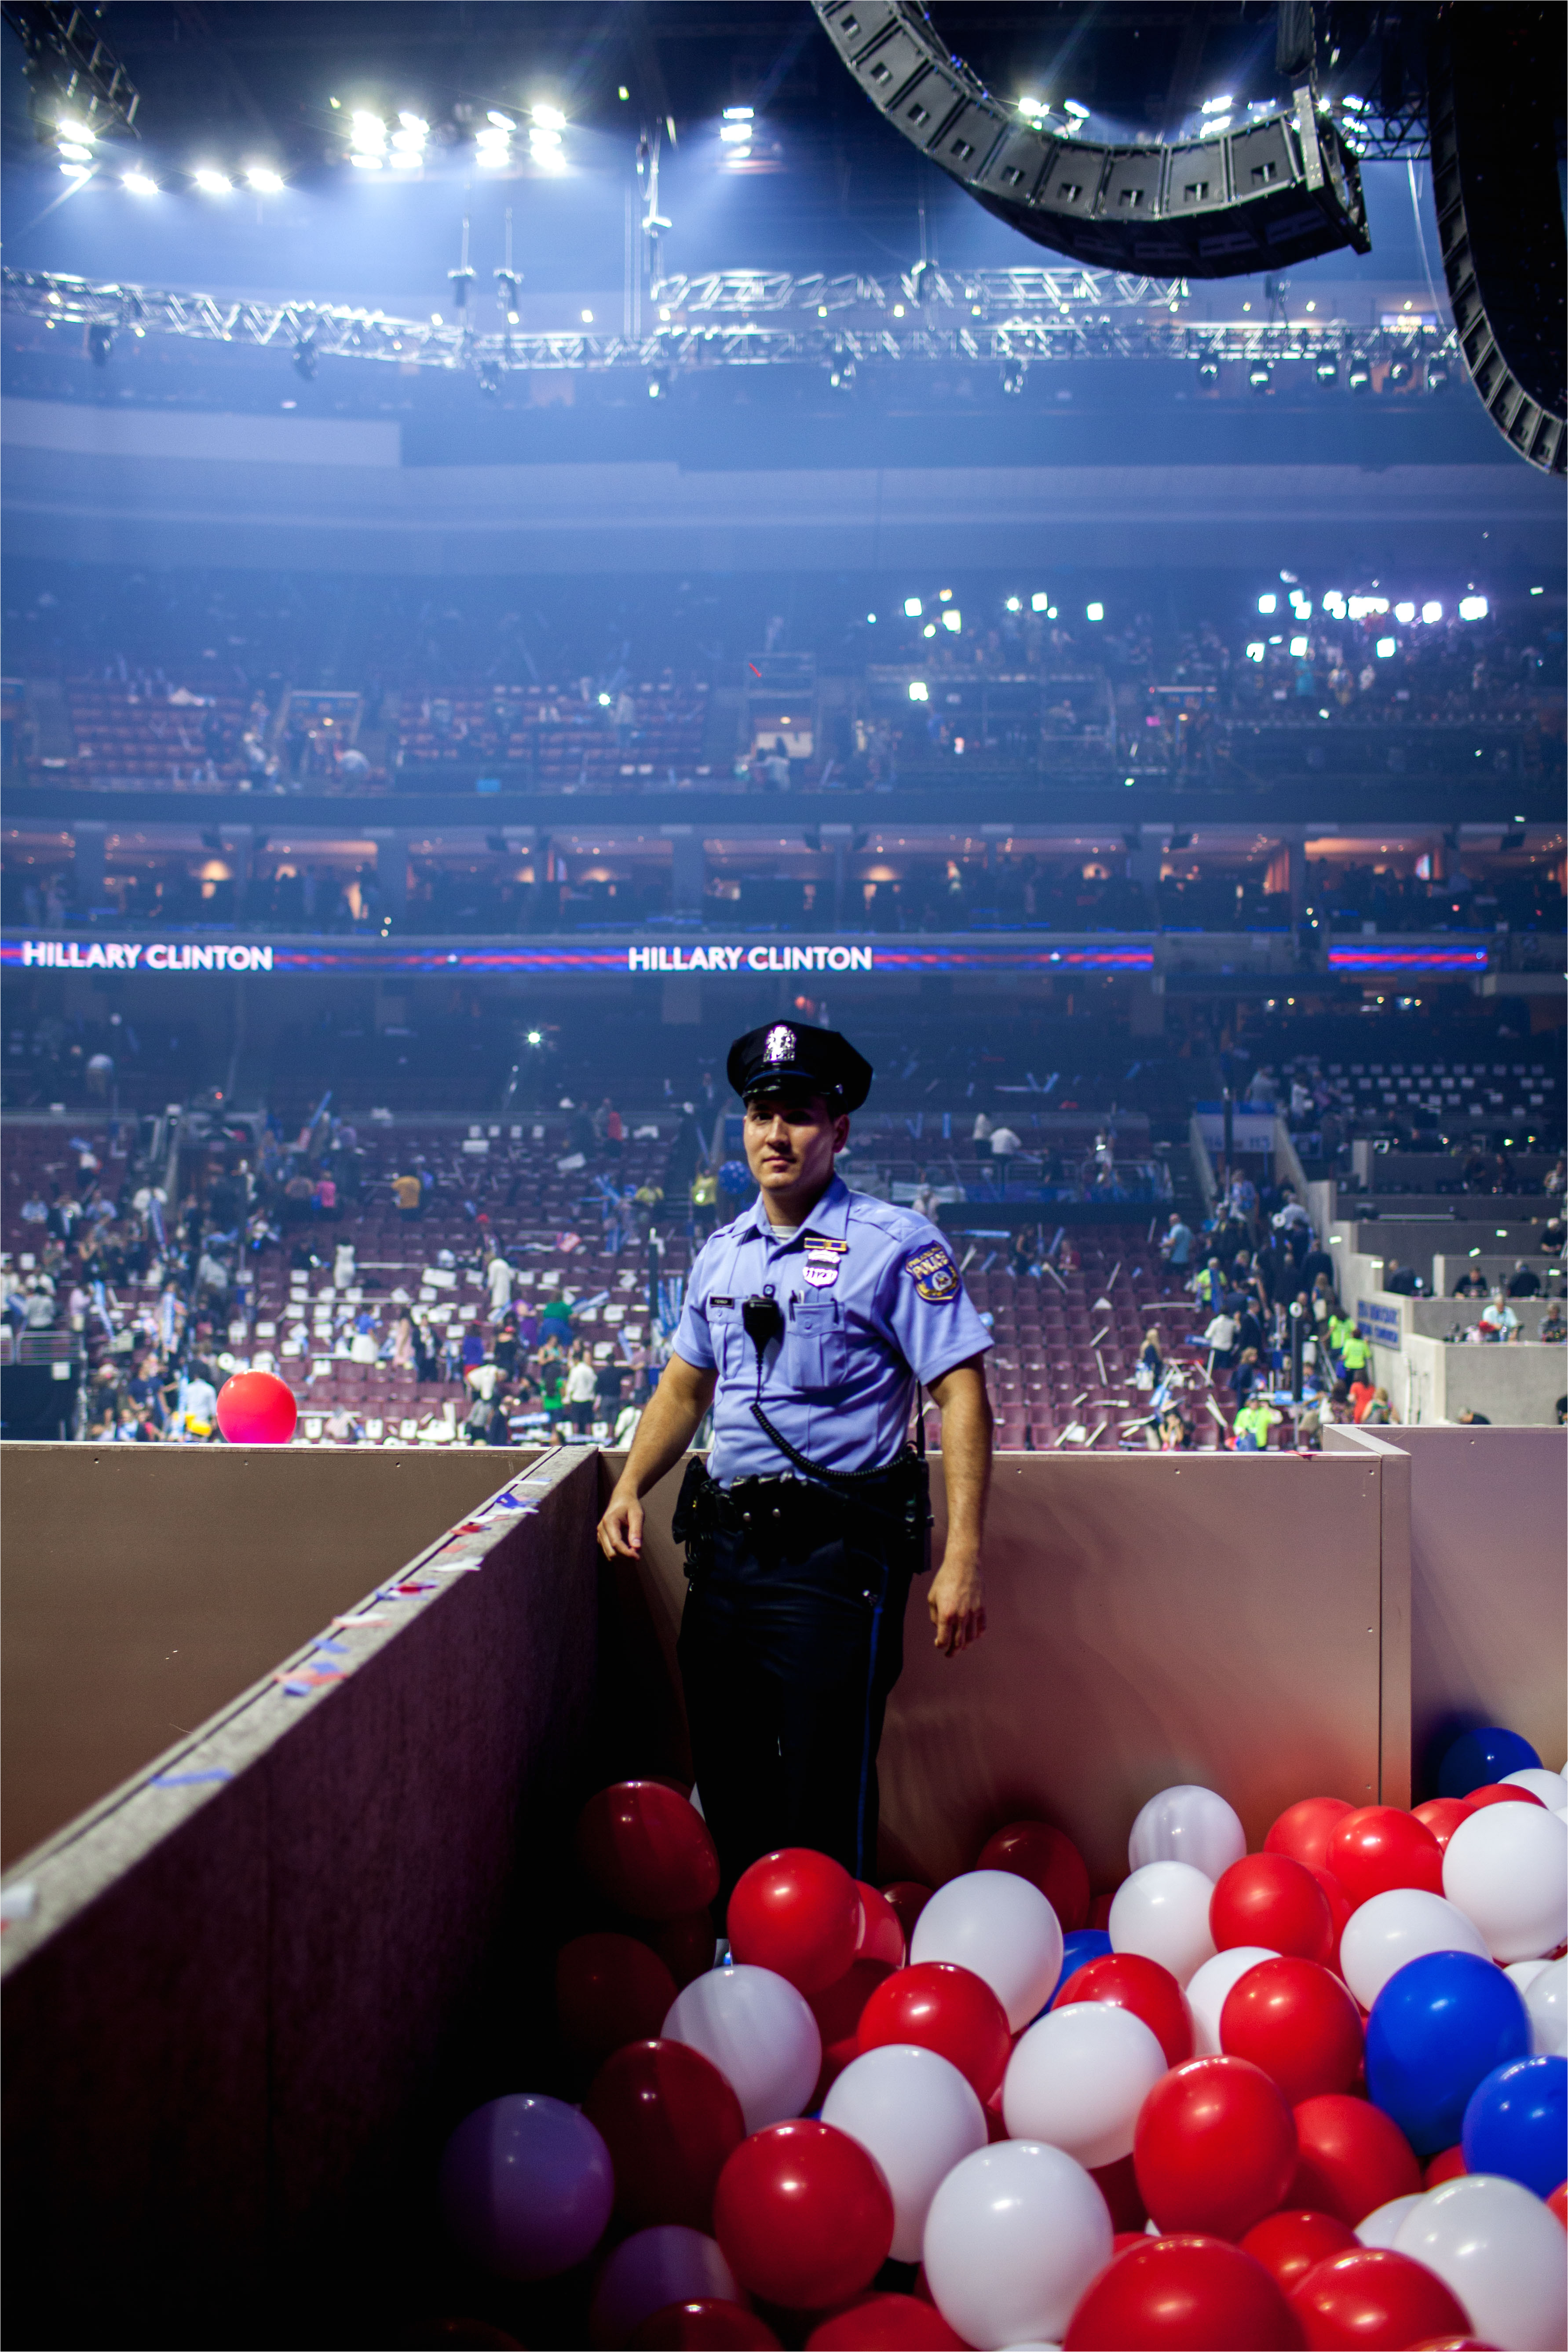 security backstage on the fourth day of the democratic national convention at the wells fargo center